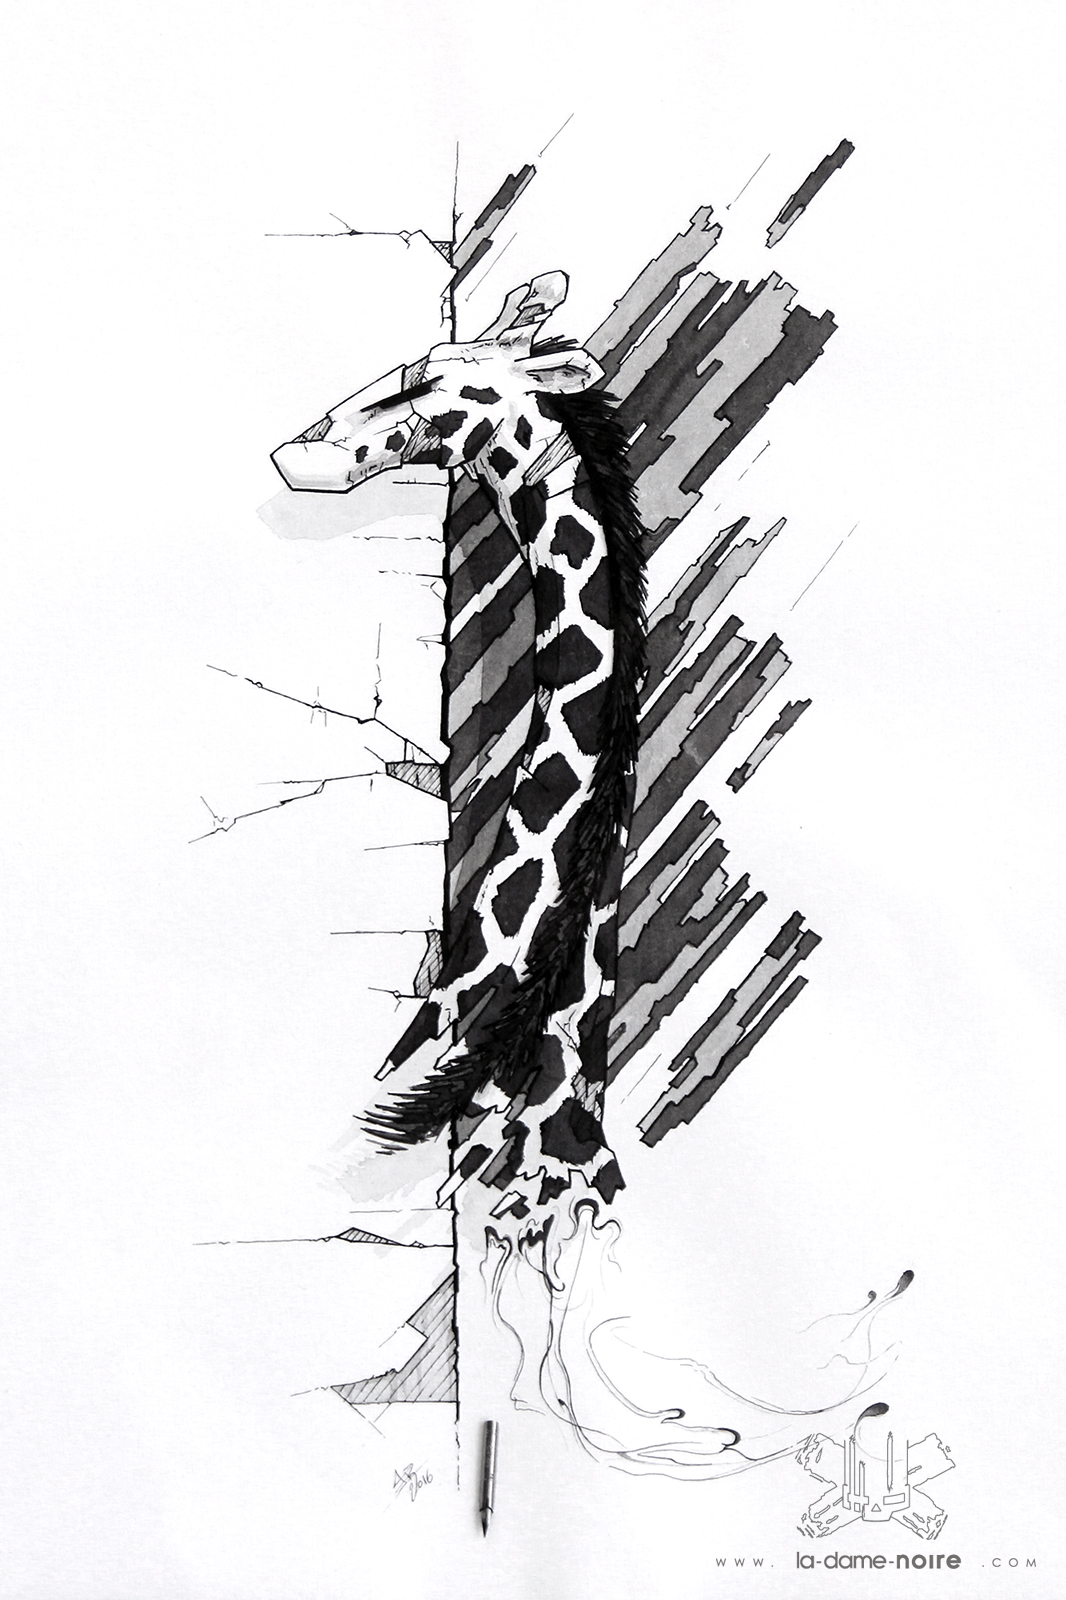 Drawing of a Giraffe made with a quill and black china ink